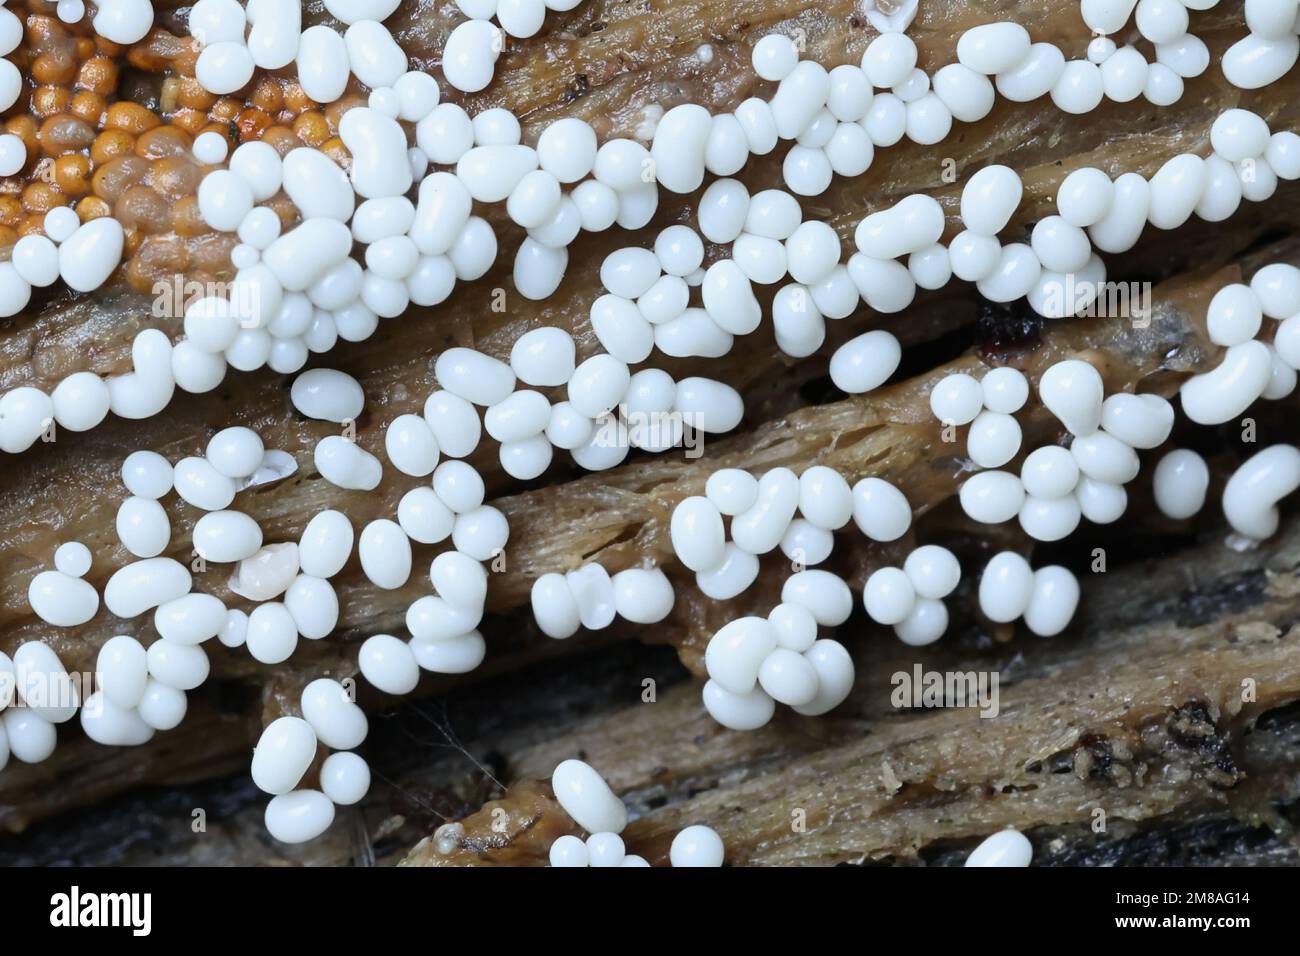 Trichia varia (white) and Trichia scabra (ochre), two slime mold species growing on wood, no common English names Stock Photo